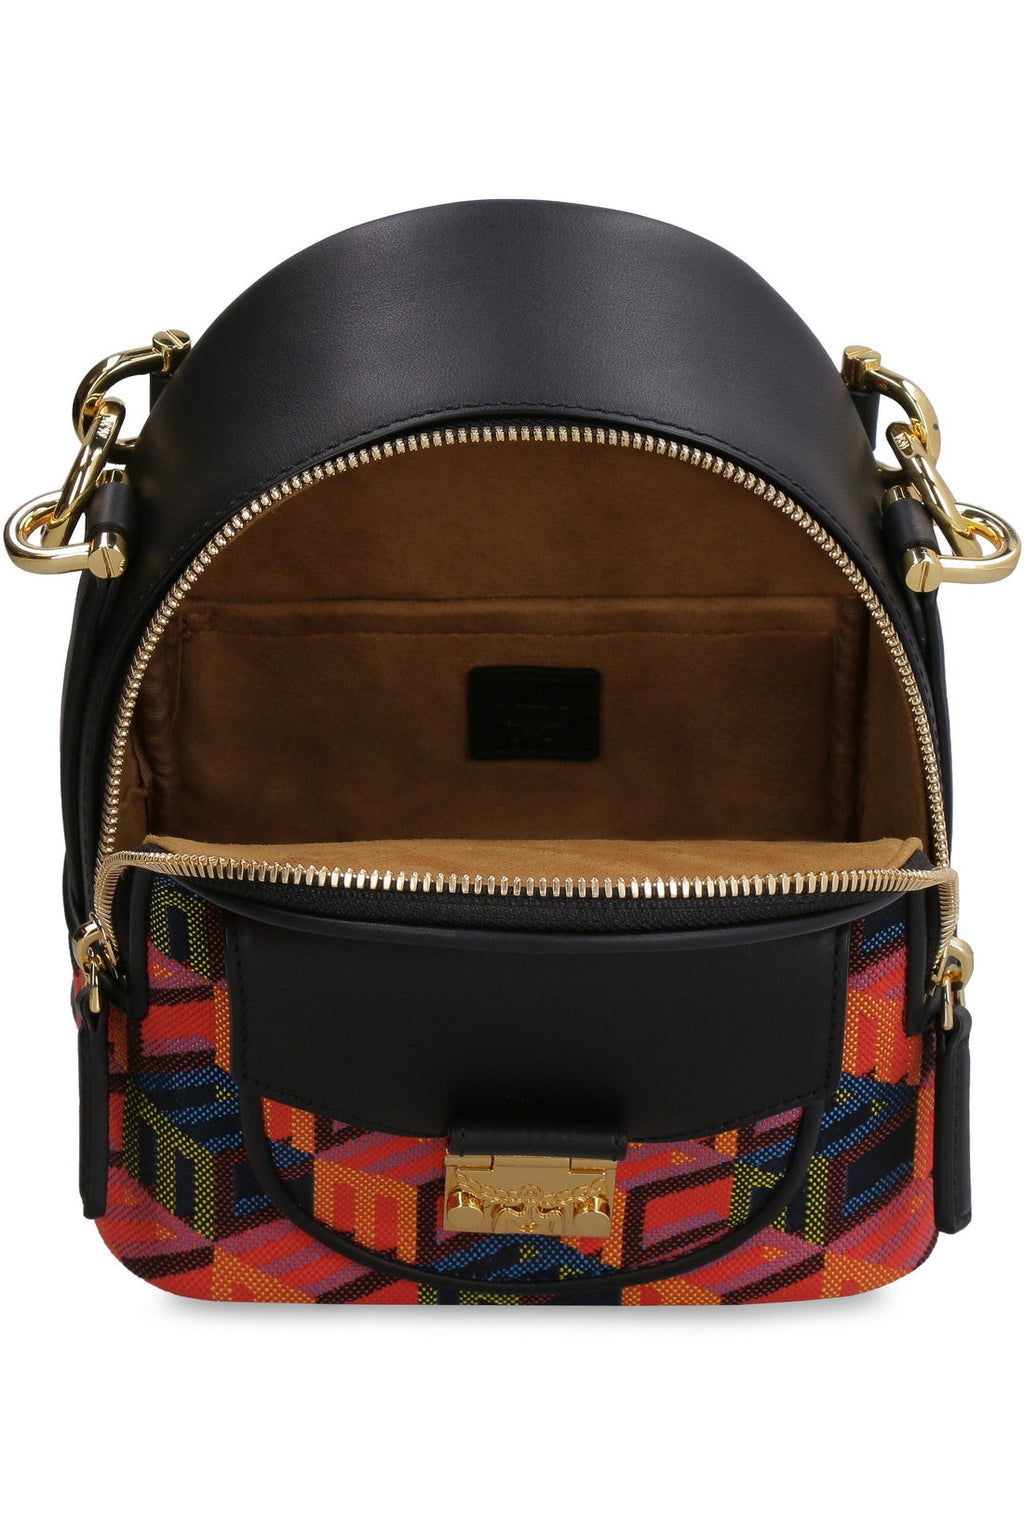 MCM-OUTLET-SALE-Patricia small convertible backpack-ARCHIVIST